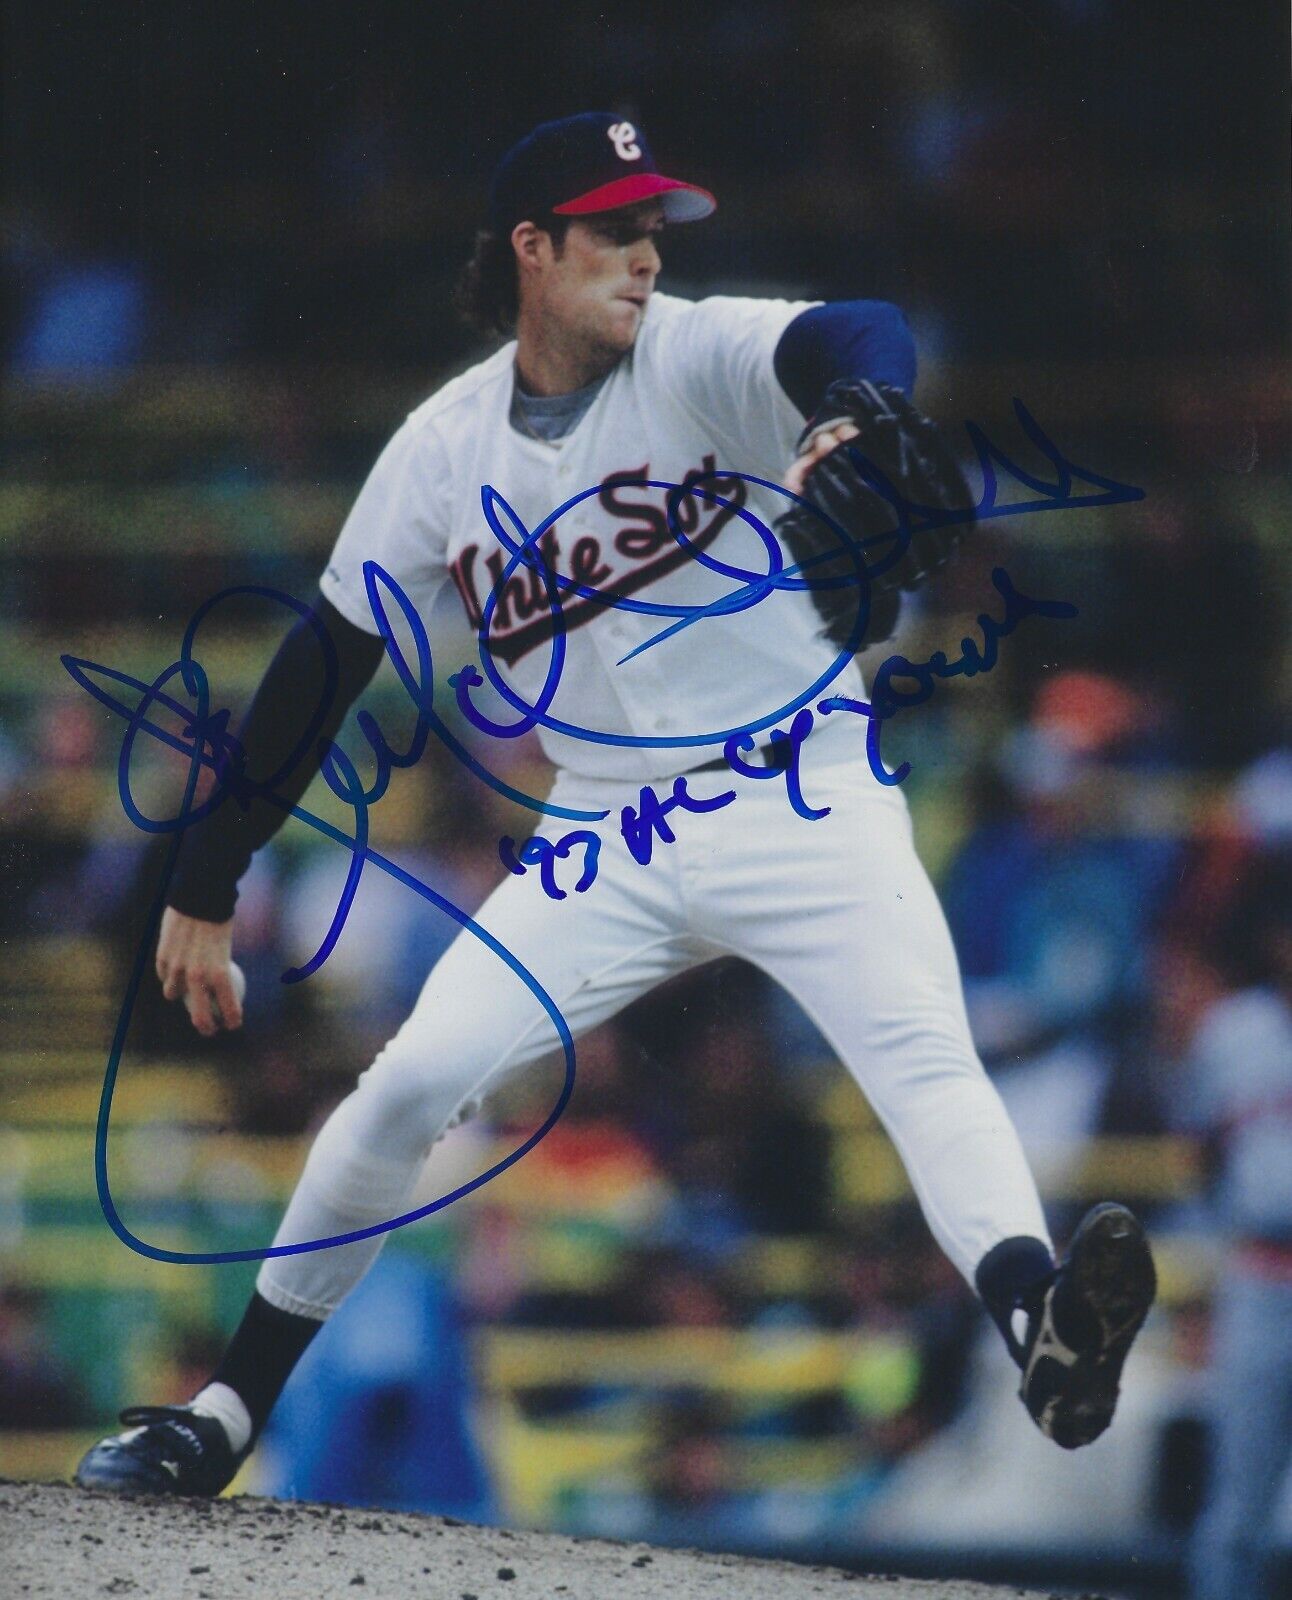 Signed 8x10 JACK MCDOWELL 93 CY Chicago White Sox Autographed Photo Poster painting - COA